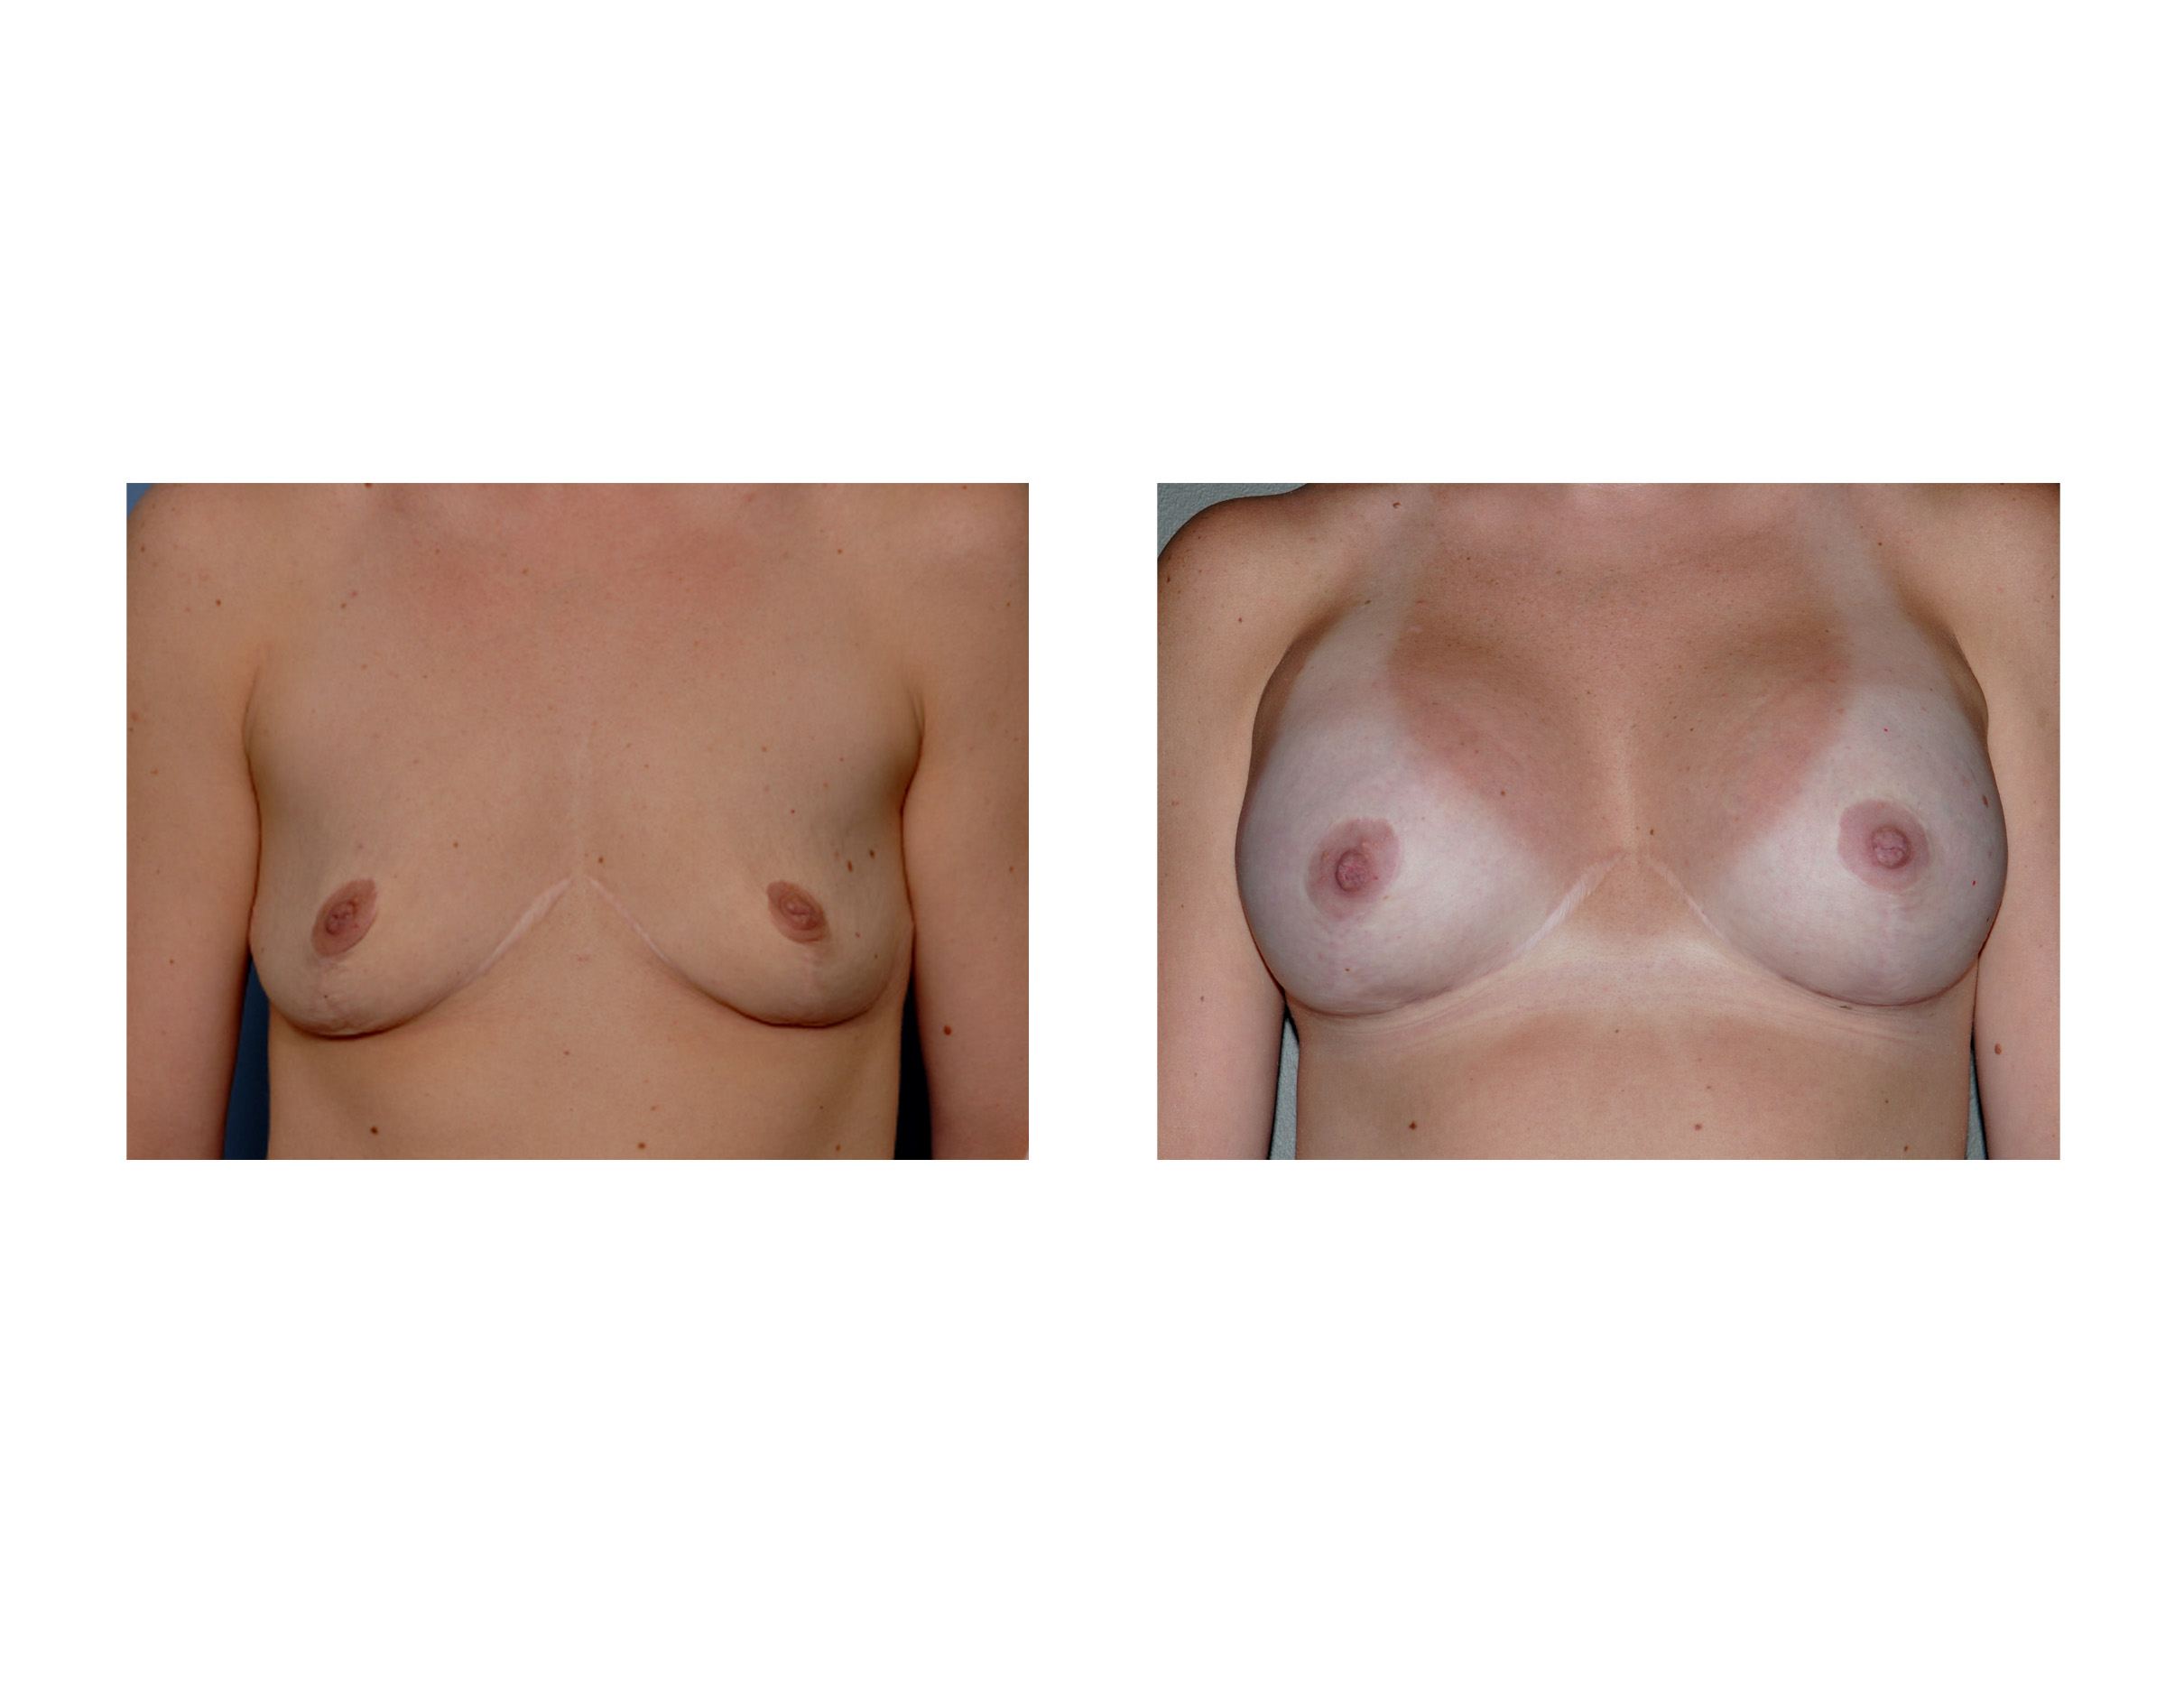 Breast Augmentation after Breast Reduction Dr Barry Eppley Indianapolis